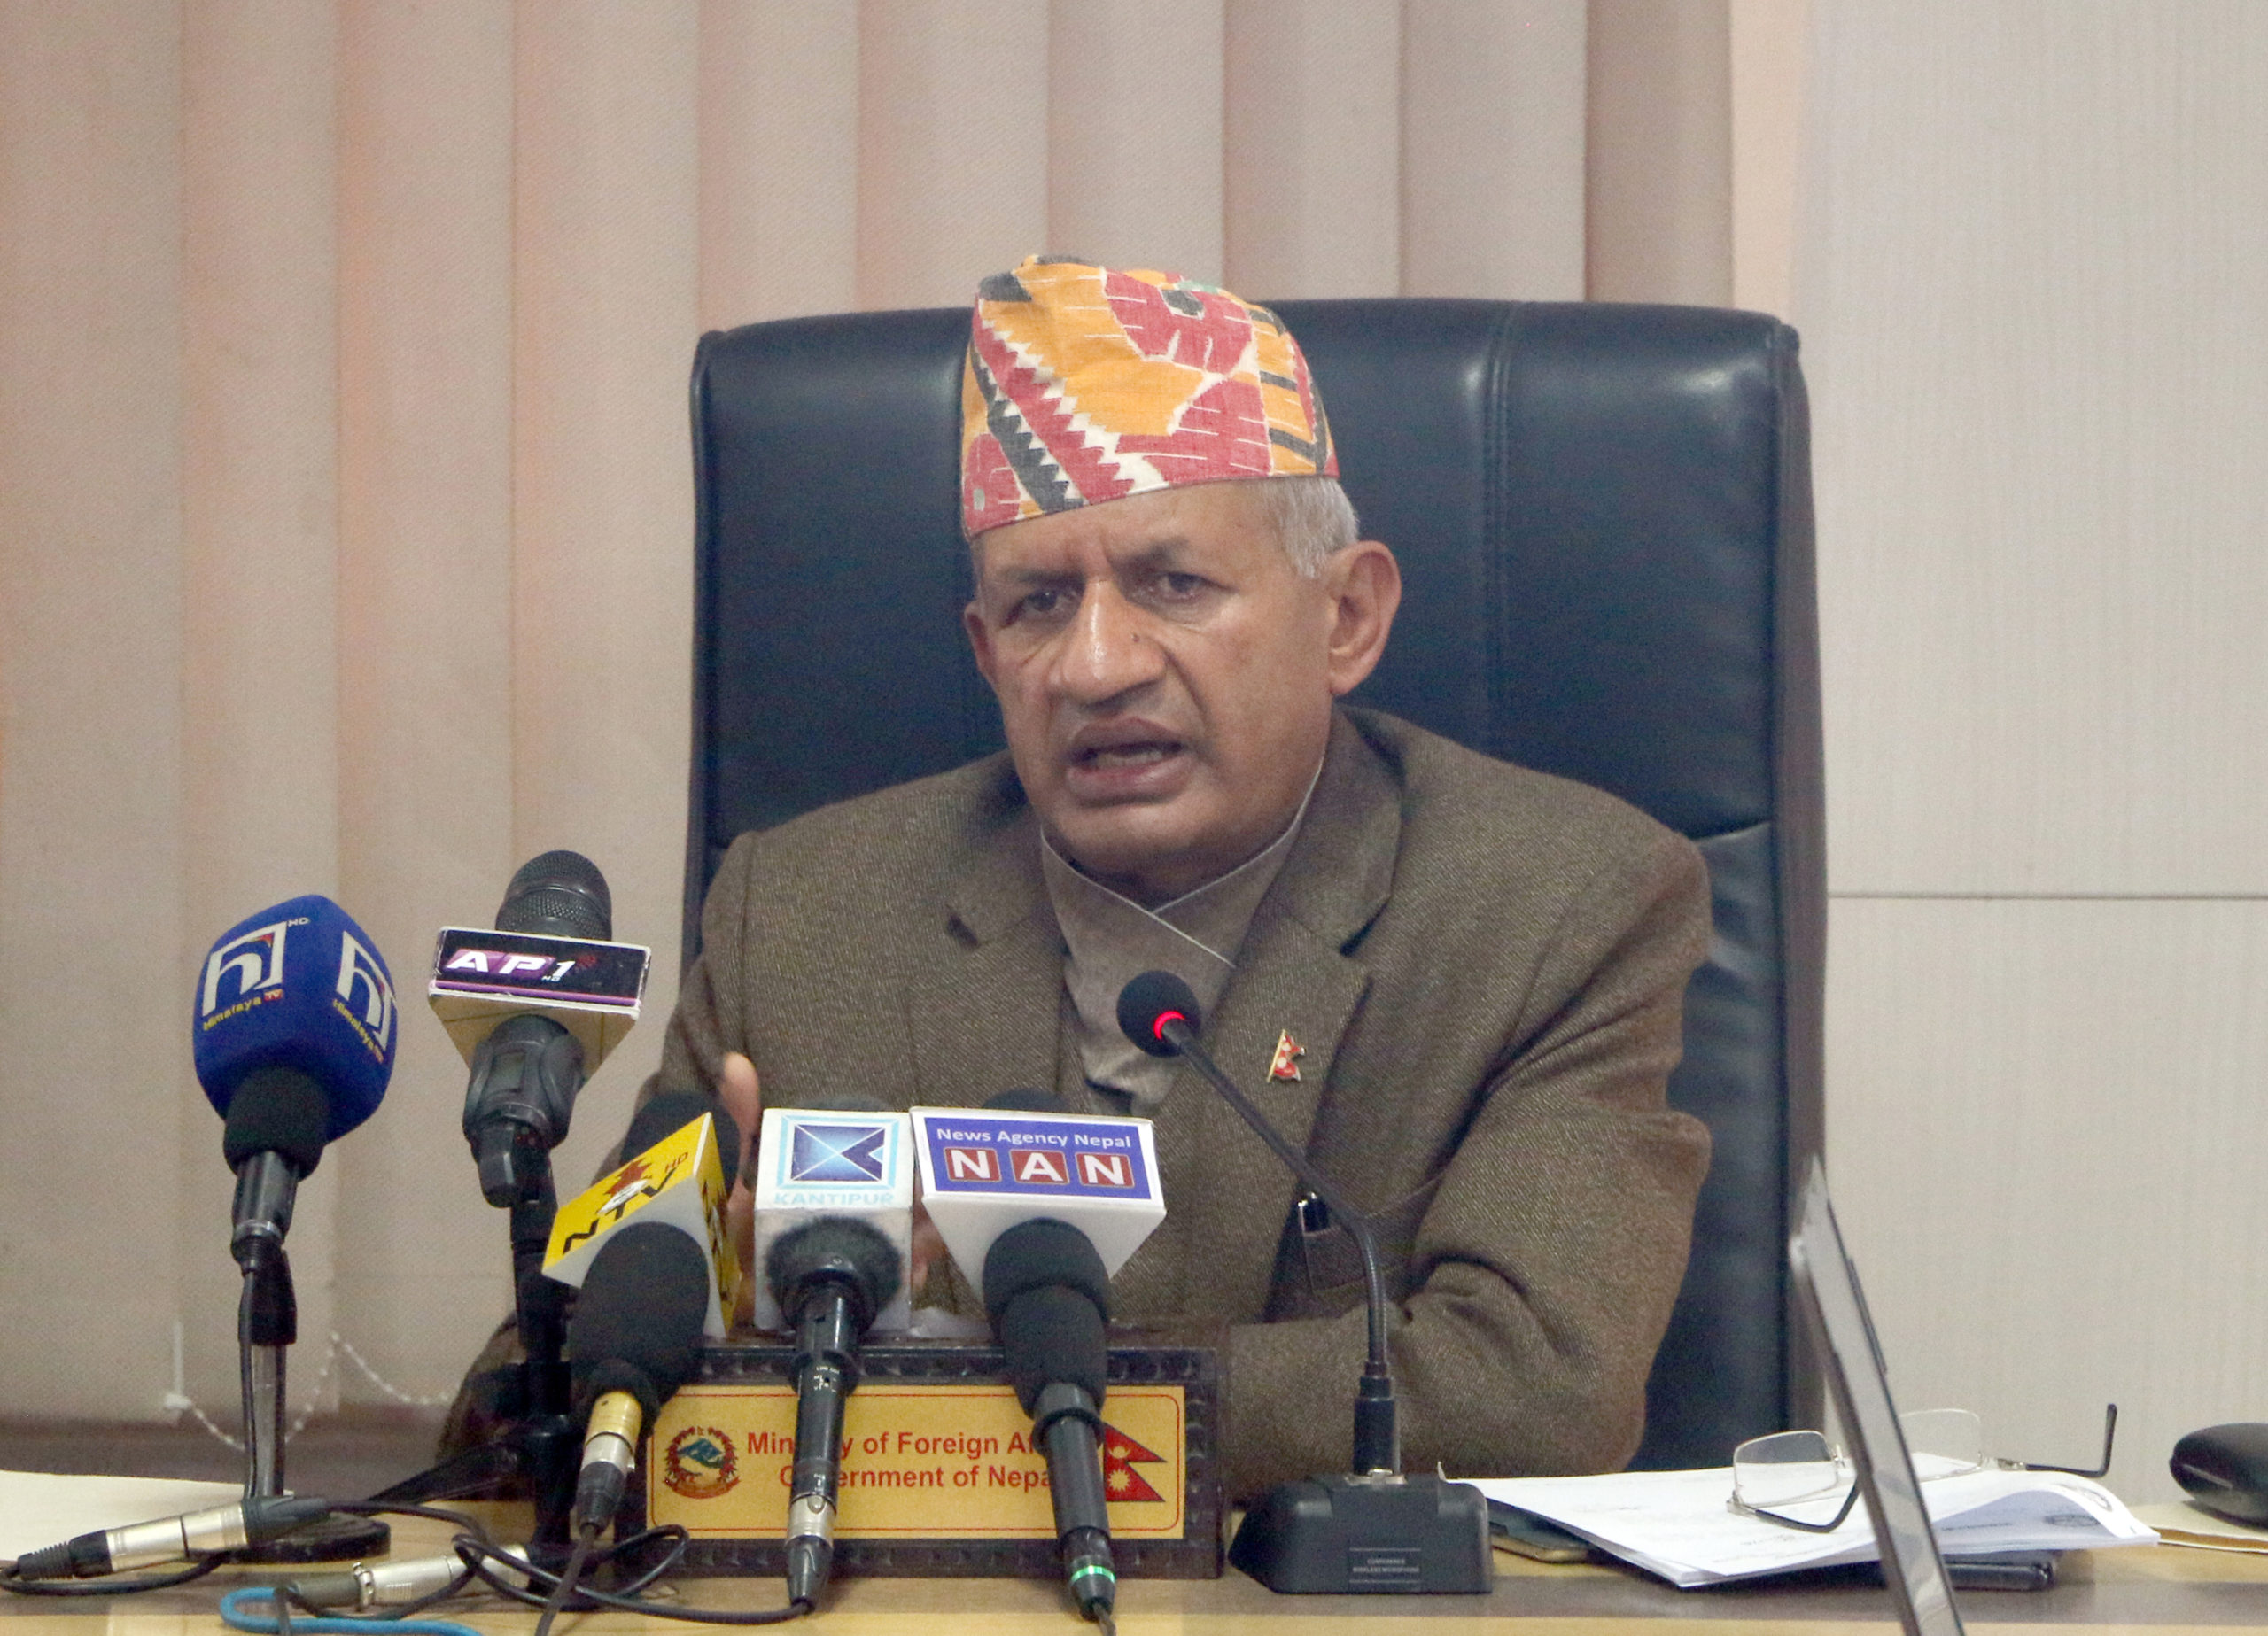 Foreign Minister Gyawali congratulates newly-appointed US Secretary of State Blinken